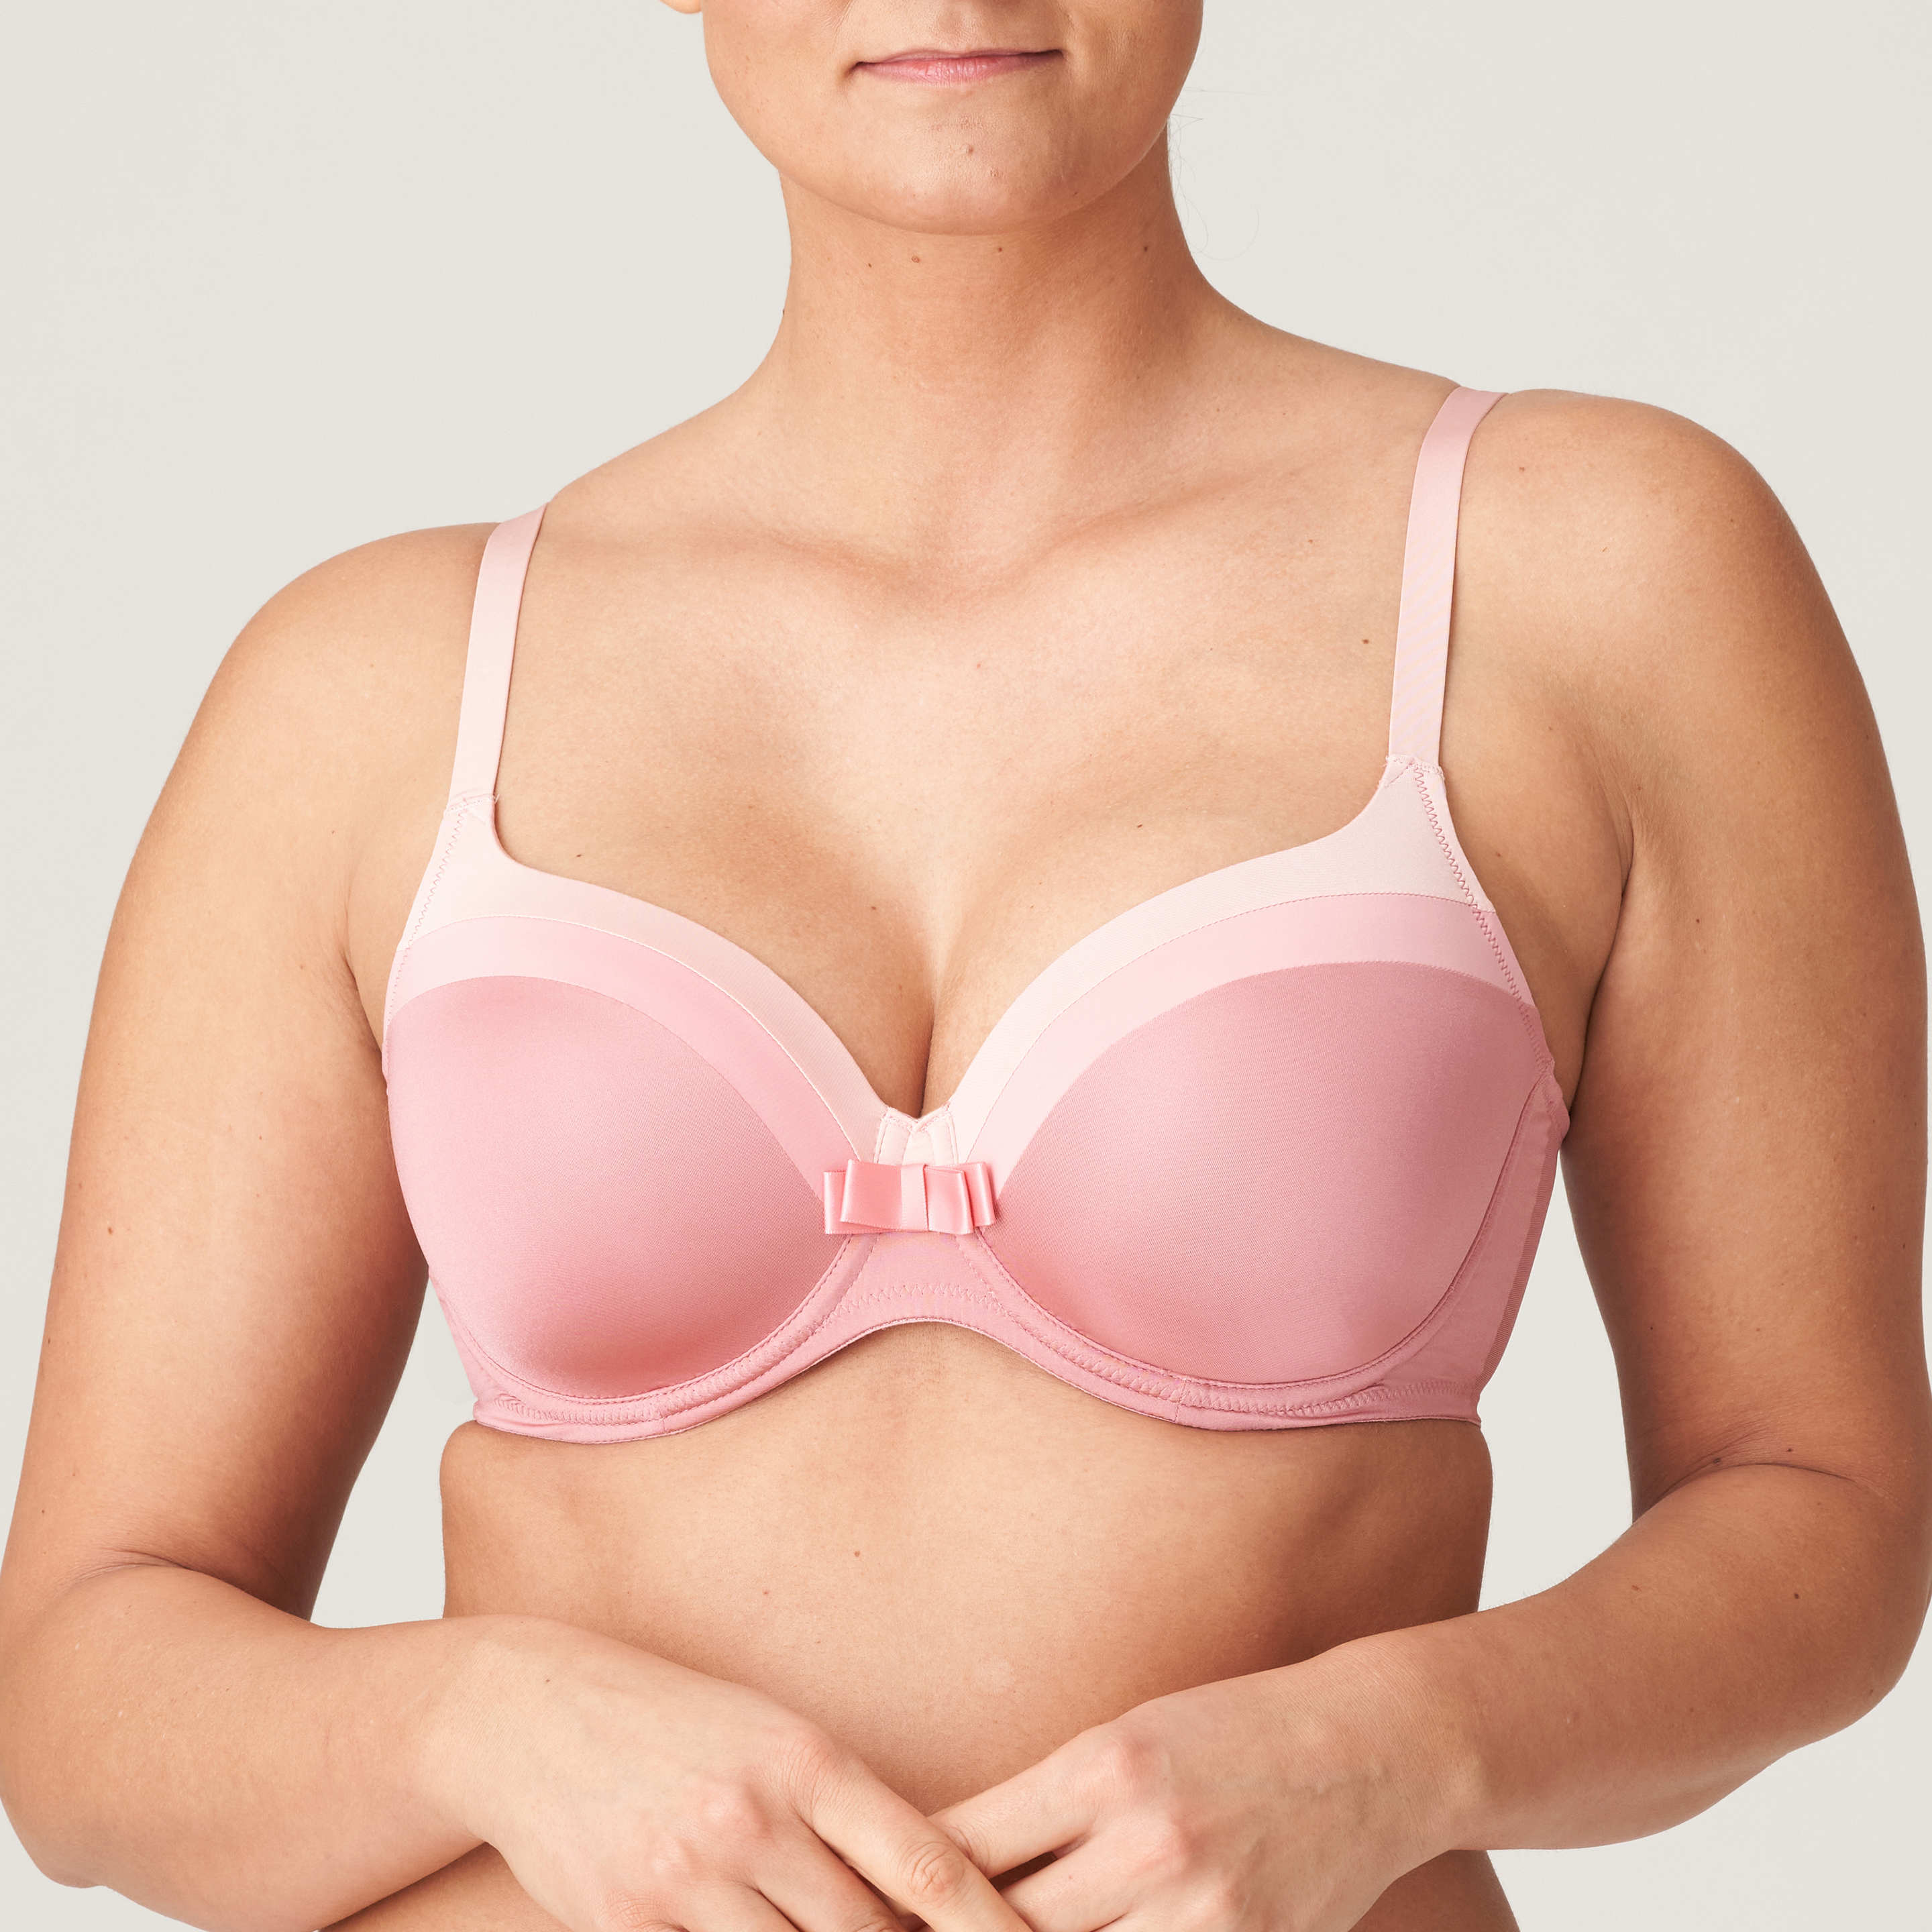 Padded bra - Heart shape Figuras Prima Donna couleur Powder rose Rose  Charbon tailles 100 105 110